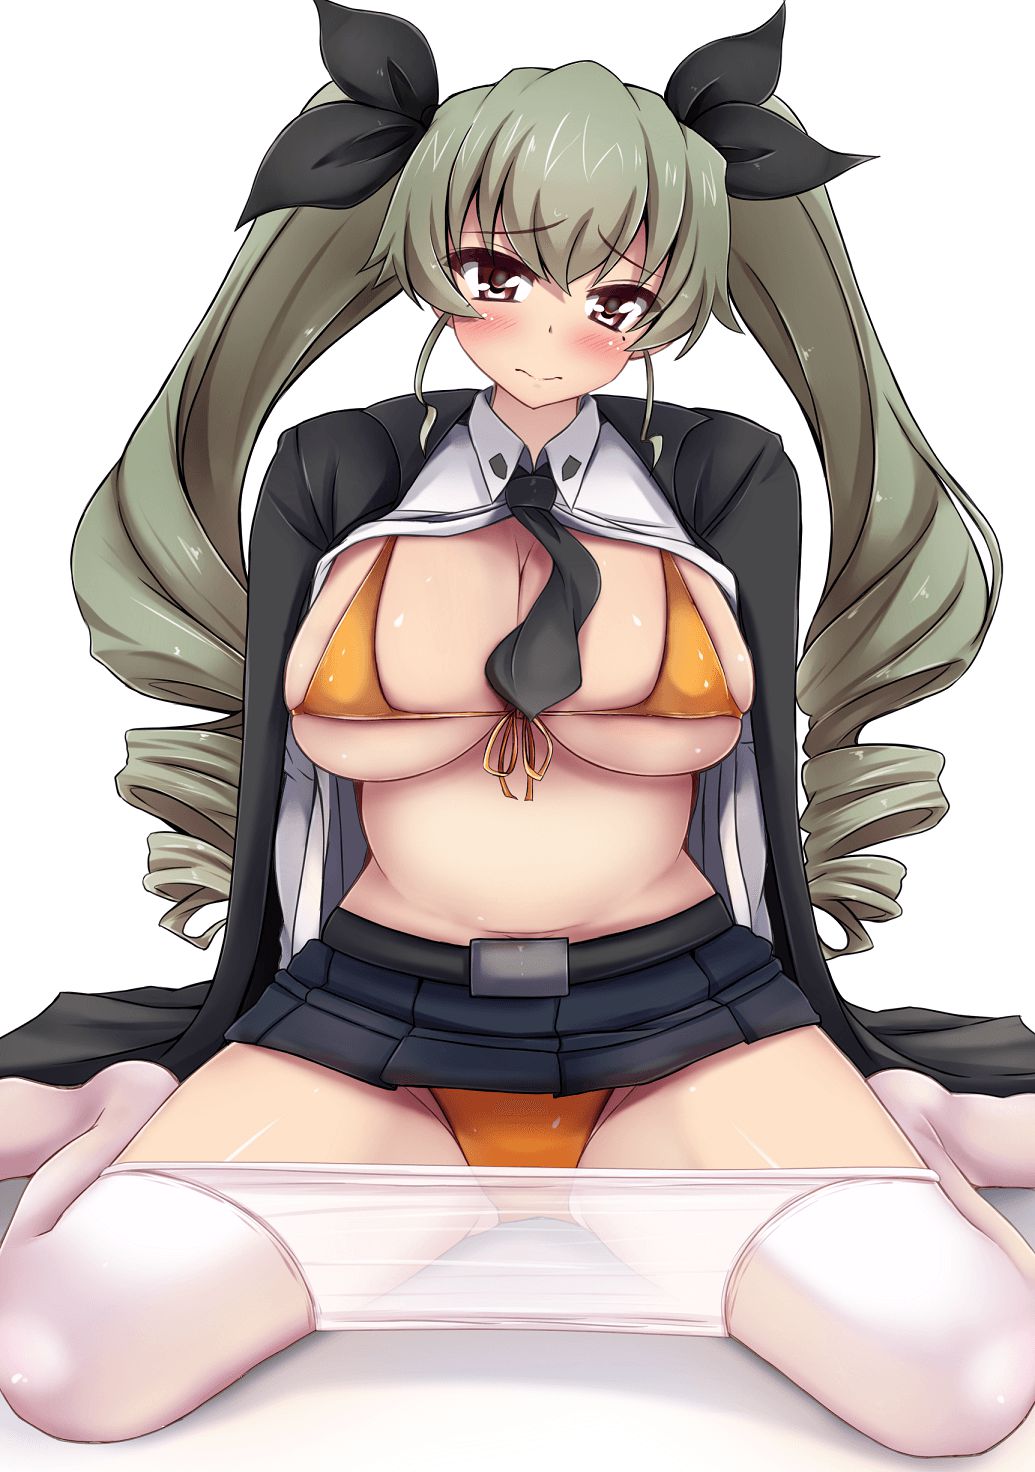 [Plate] Dutch that anchovy vertical roll twin tail cute MoE erotic images part 2 8